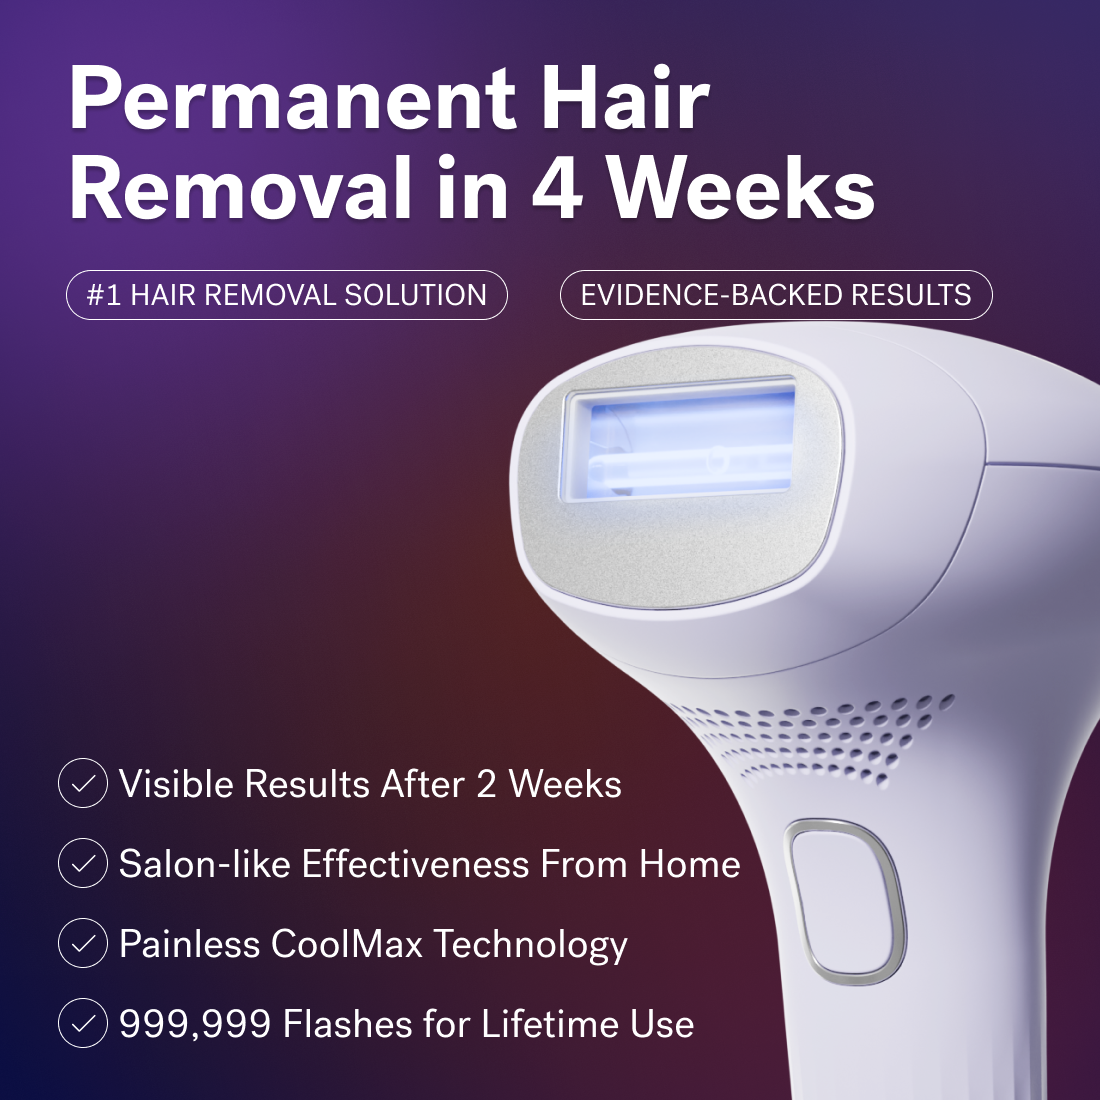 Lavender Lust - Close-up of a Lumos IPL device by Michael Todd Beauty with a text overlay stating "Permanent Hair Removal in 4 Weeks," highlighting features such as "Visible Results After 2 Weeks" and "999,999 Flashes for Lifetime Use." Experience convenient at-home hair removal with IPL therapy for long-lasting smooth skin.